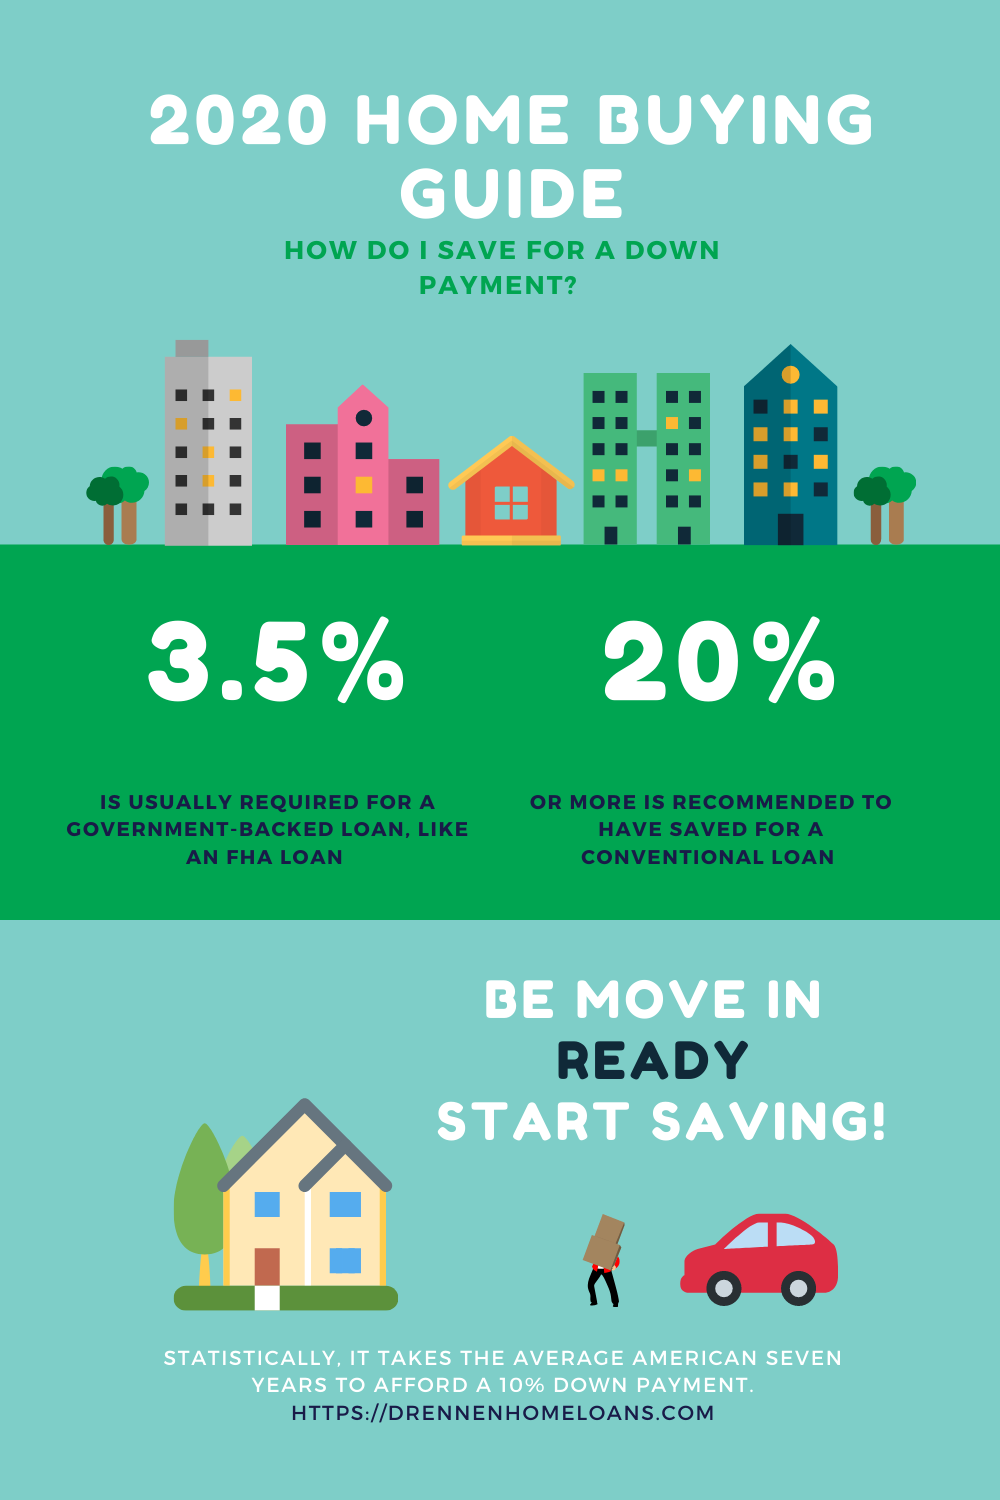 2020 Home Buying Guide: Saving for a 